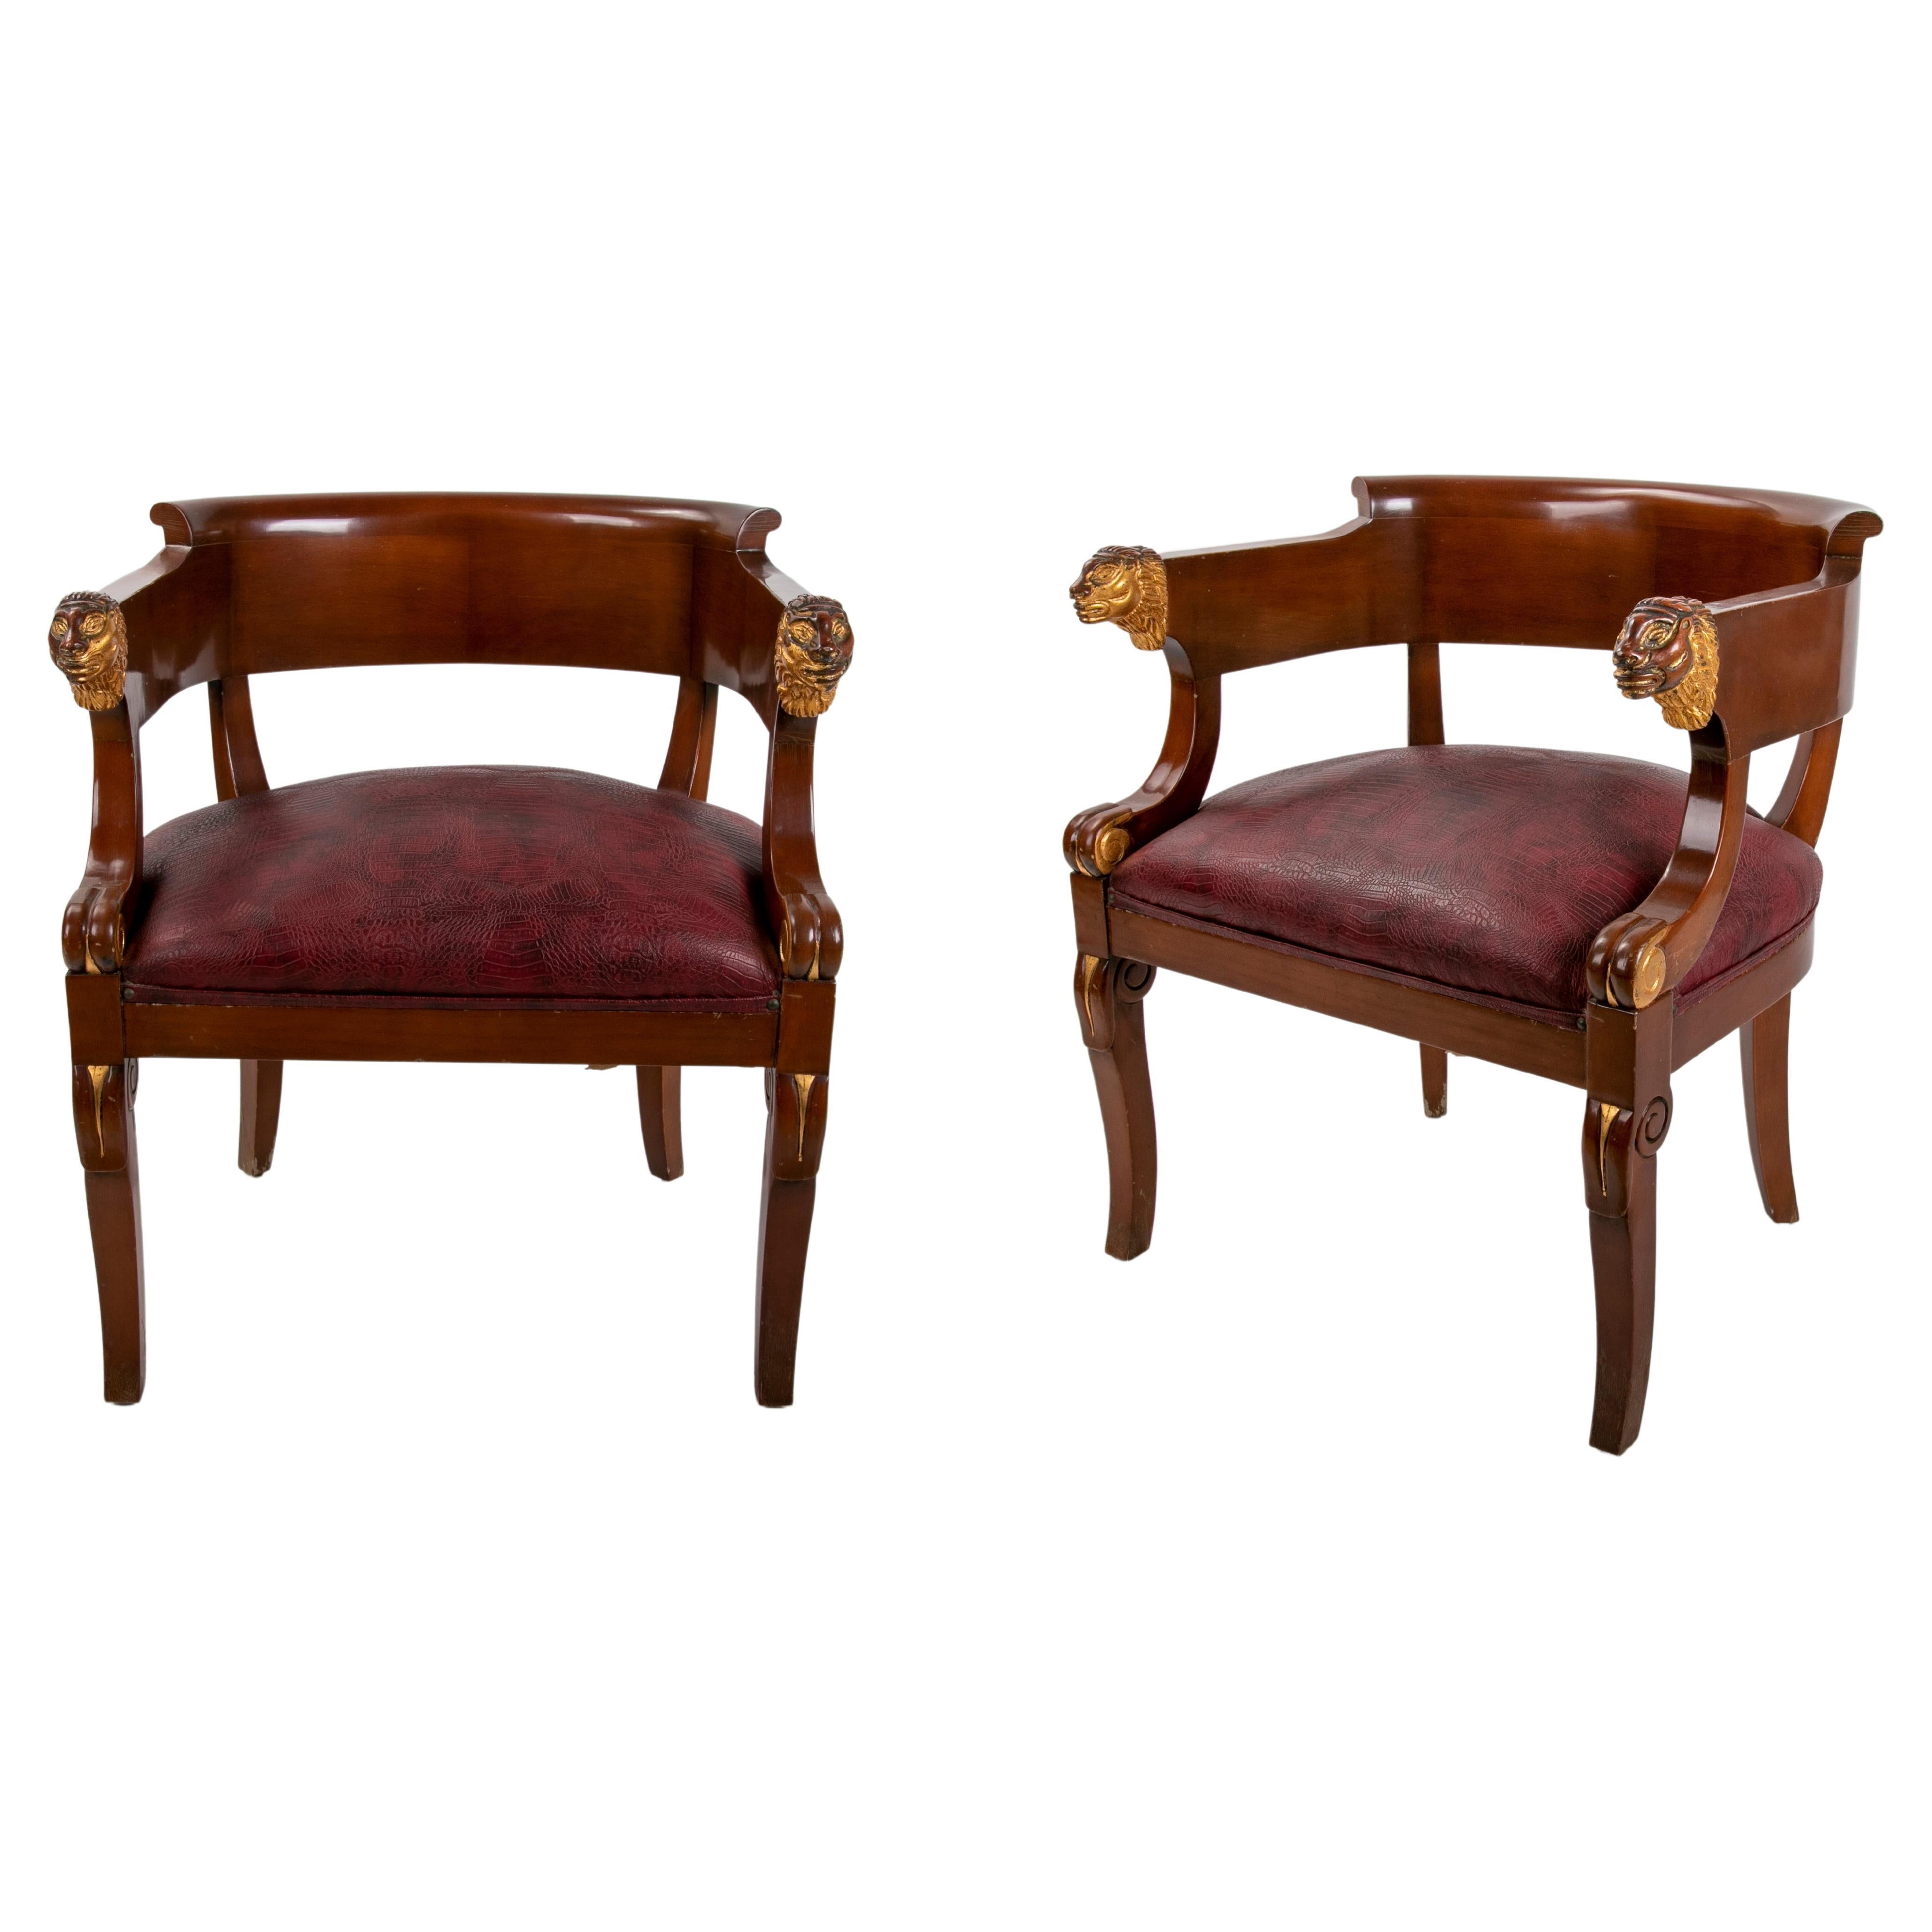 Pair of Wooden Armchairs with Lions on the Armrests